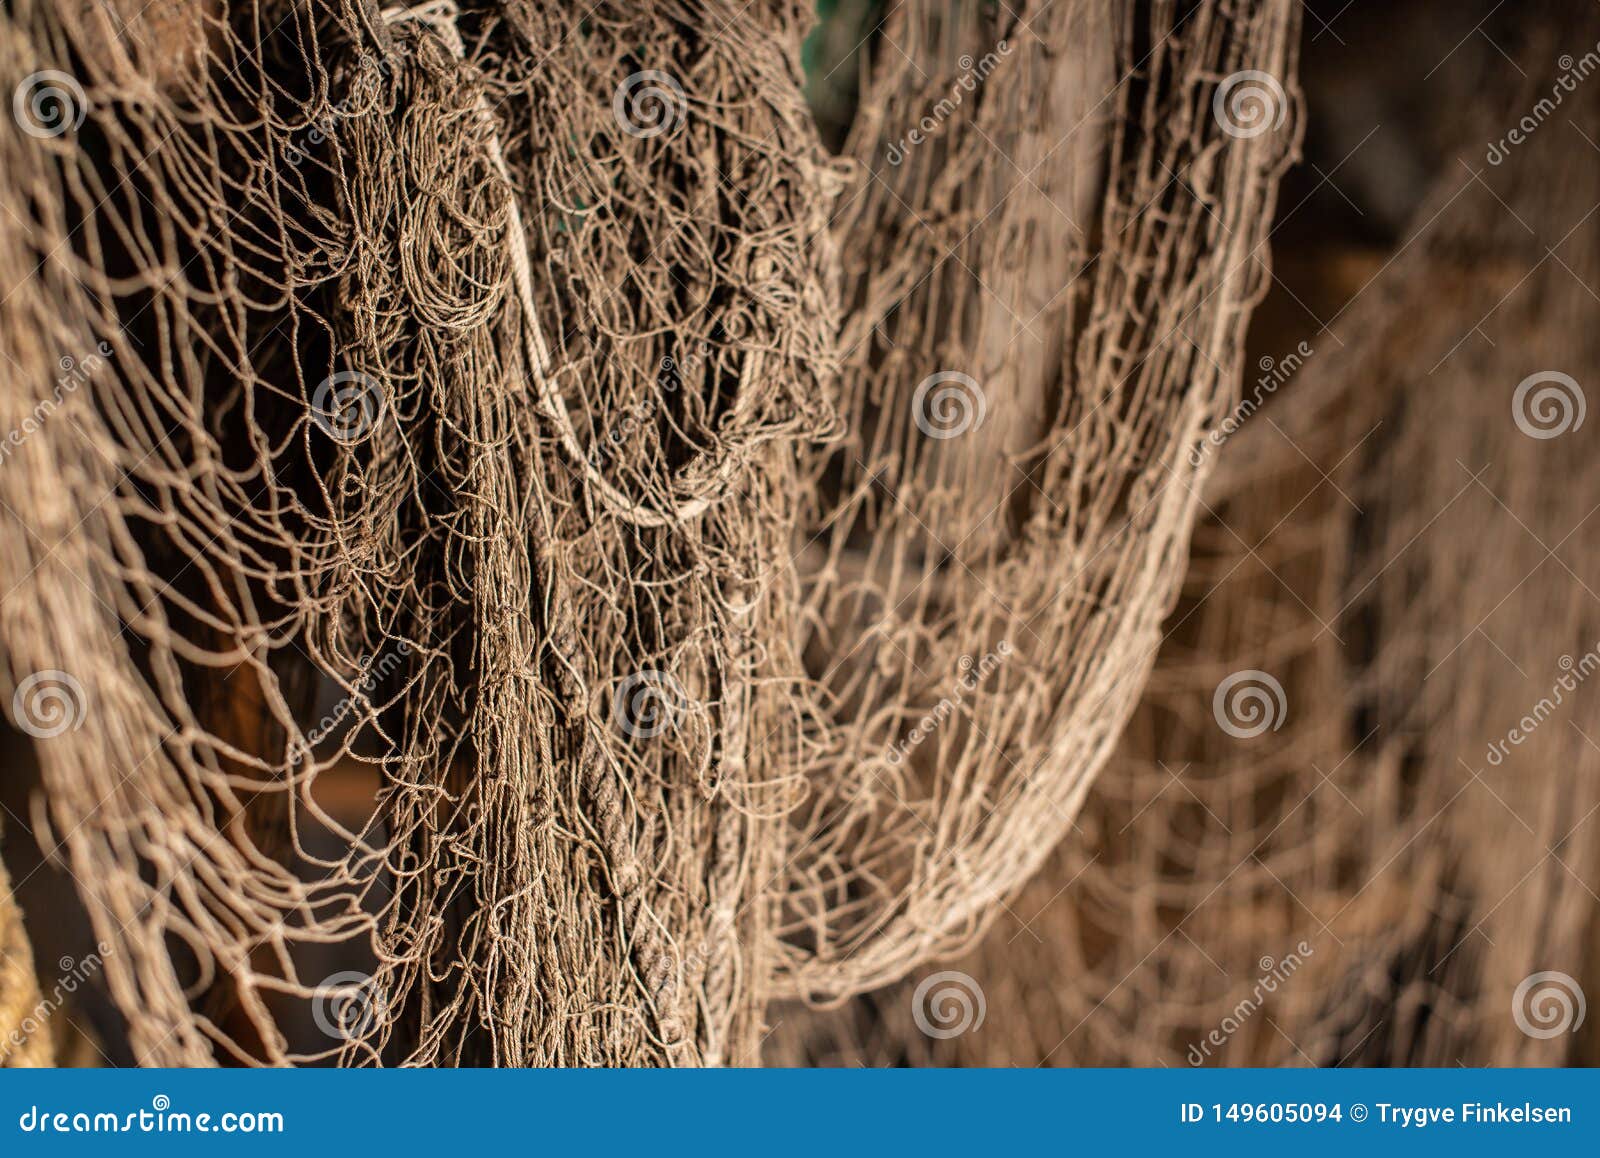 Vintage Nets Used in Fishing a Long Time Ago Stock Photo - Image of fish,  cord: 149605094